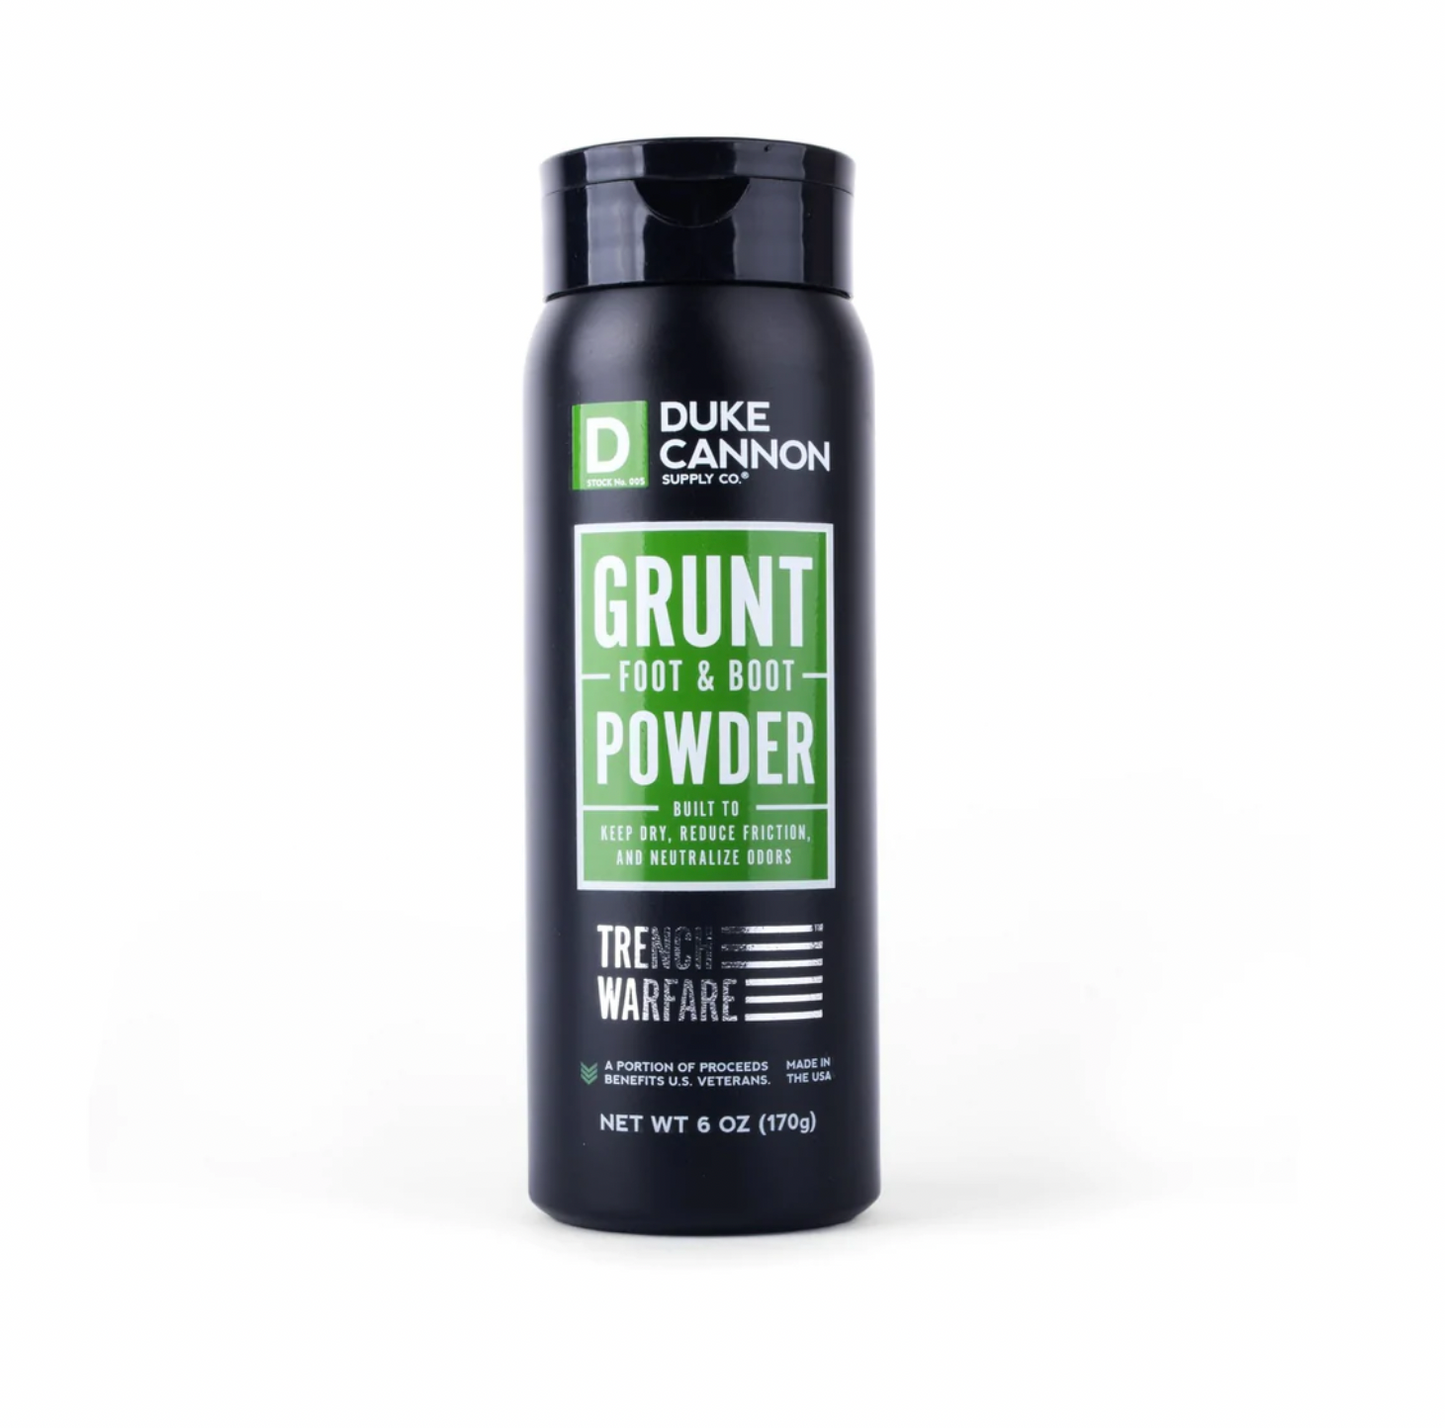 Grunt Foot And Boot Powder